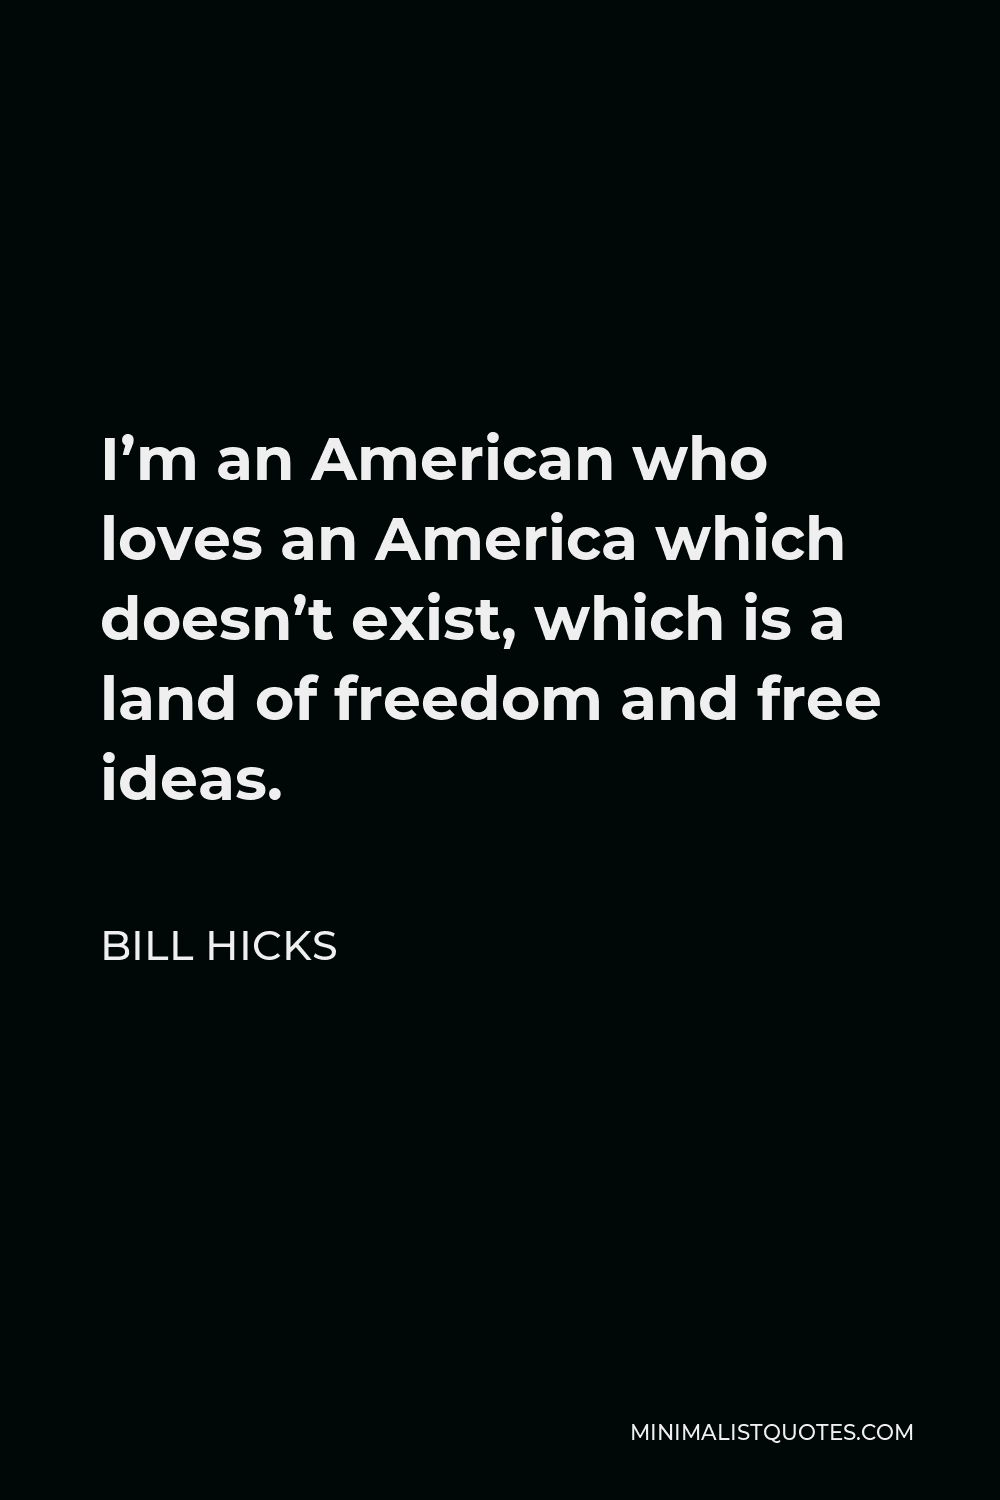 Bill Hicks Quote - I’m an American who loves an America which doesn’t exist, which is a land of freedom and free ideas.